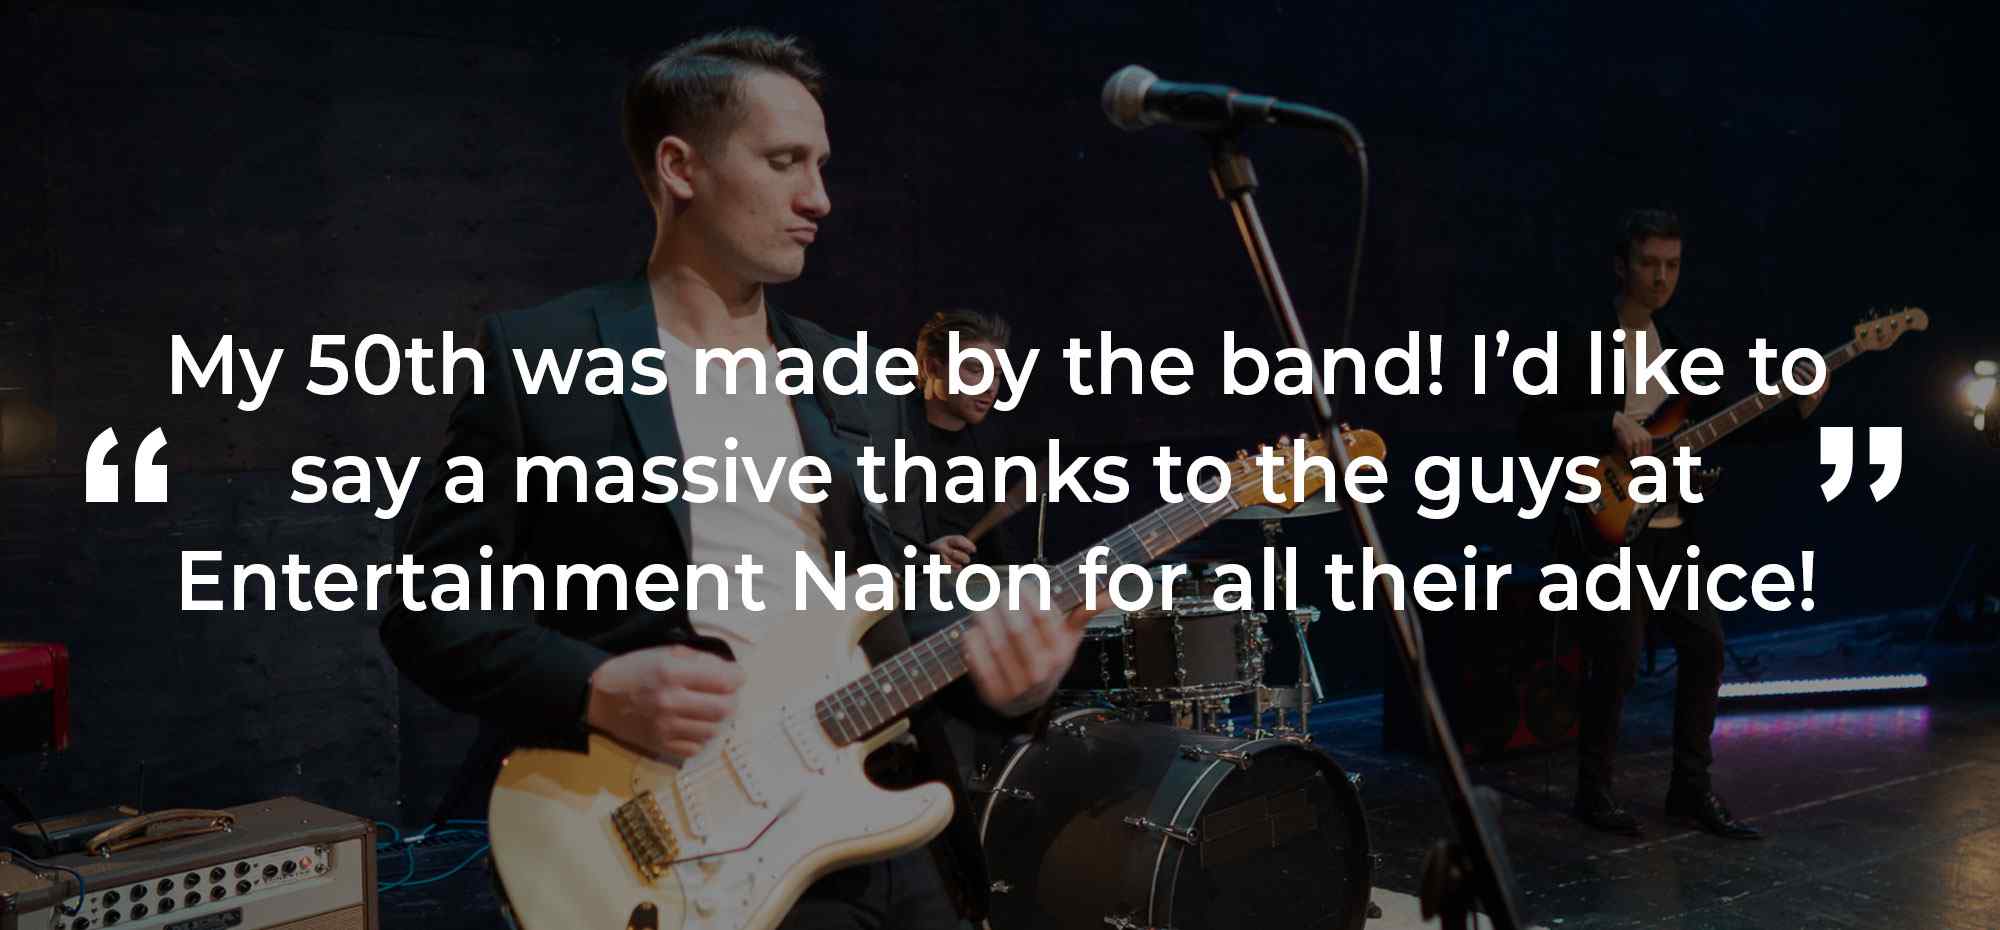 Client Review of a Party Band Mid Glamorgan